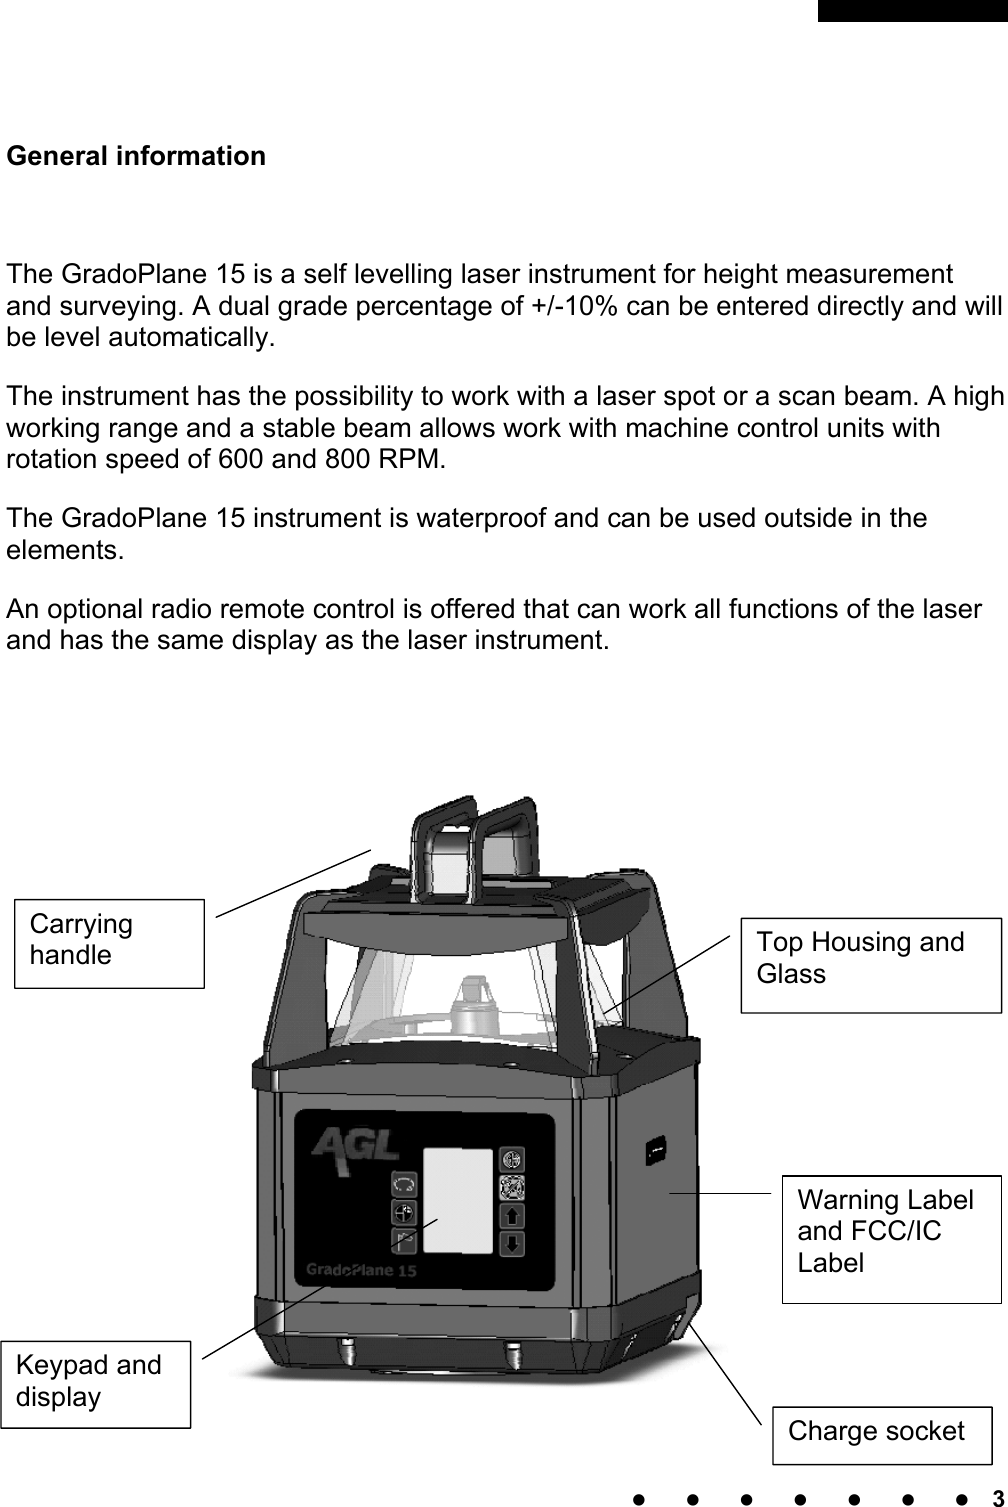                                                           3     General information  The GradoPlane 15 is a self levelling laser instrument for height measurement and surveying. A dual grade percentage of +/-10% can be entered directly and will be level automatically. The instrument has the possibility to work with a laser spot or a scan beam. A high working range and a stable beam allows work with machine control units with rotation speed of 600 and 800 RPM.  The GradoPlane 15 instrument is waterproof and can be used outside in the elements.  An optional radio remote control is offered that can work all functions of the laser and has the same display as the laser instrument.   Version QL125s stehen über eine weitere vertikale Laserebene weitere Sonderfunktionen, wie eine  Zielfindung mit dem optionalen zur  Verfügung.    Charge socketKeypad and display Carrying handle  Top Housing and Glass Warning Label and FCC/IC Label 